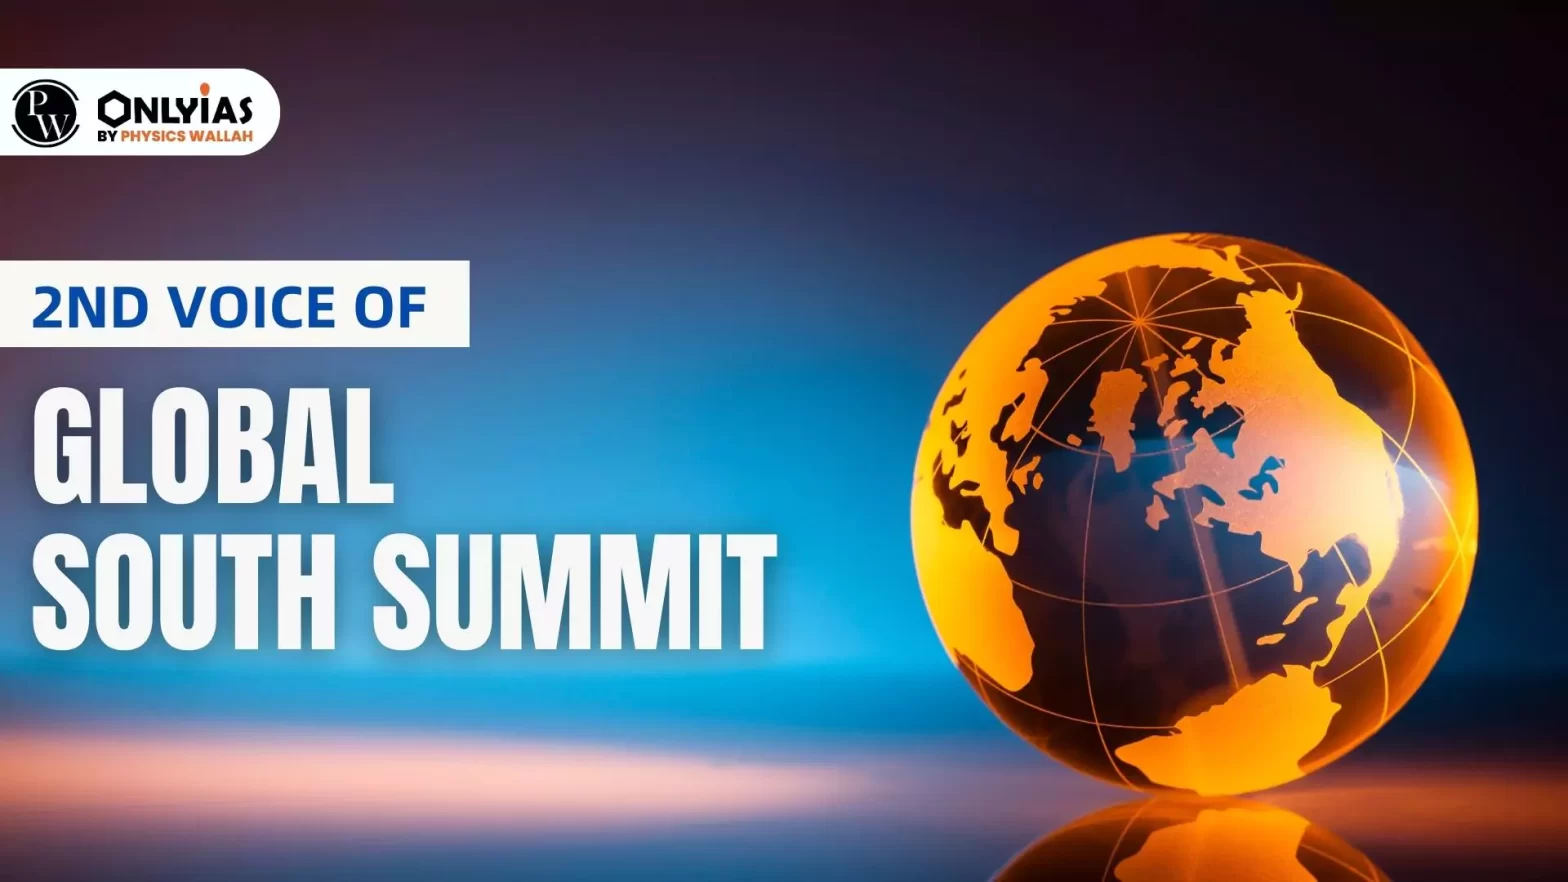 2nd Voice of Global South Summit